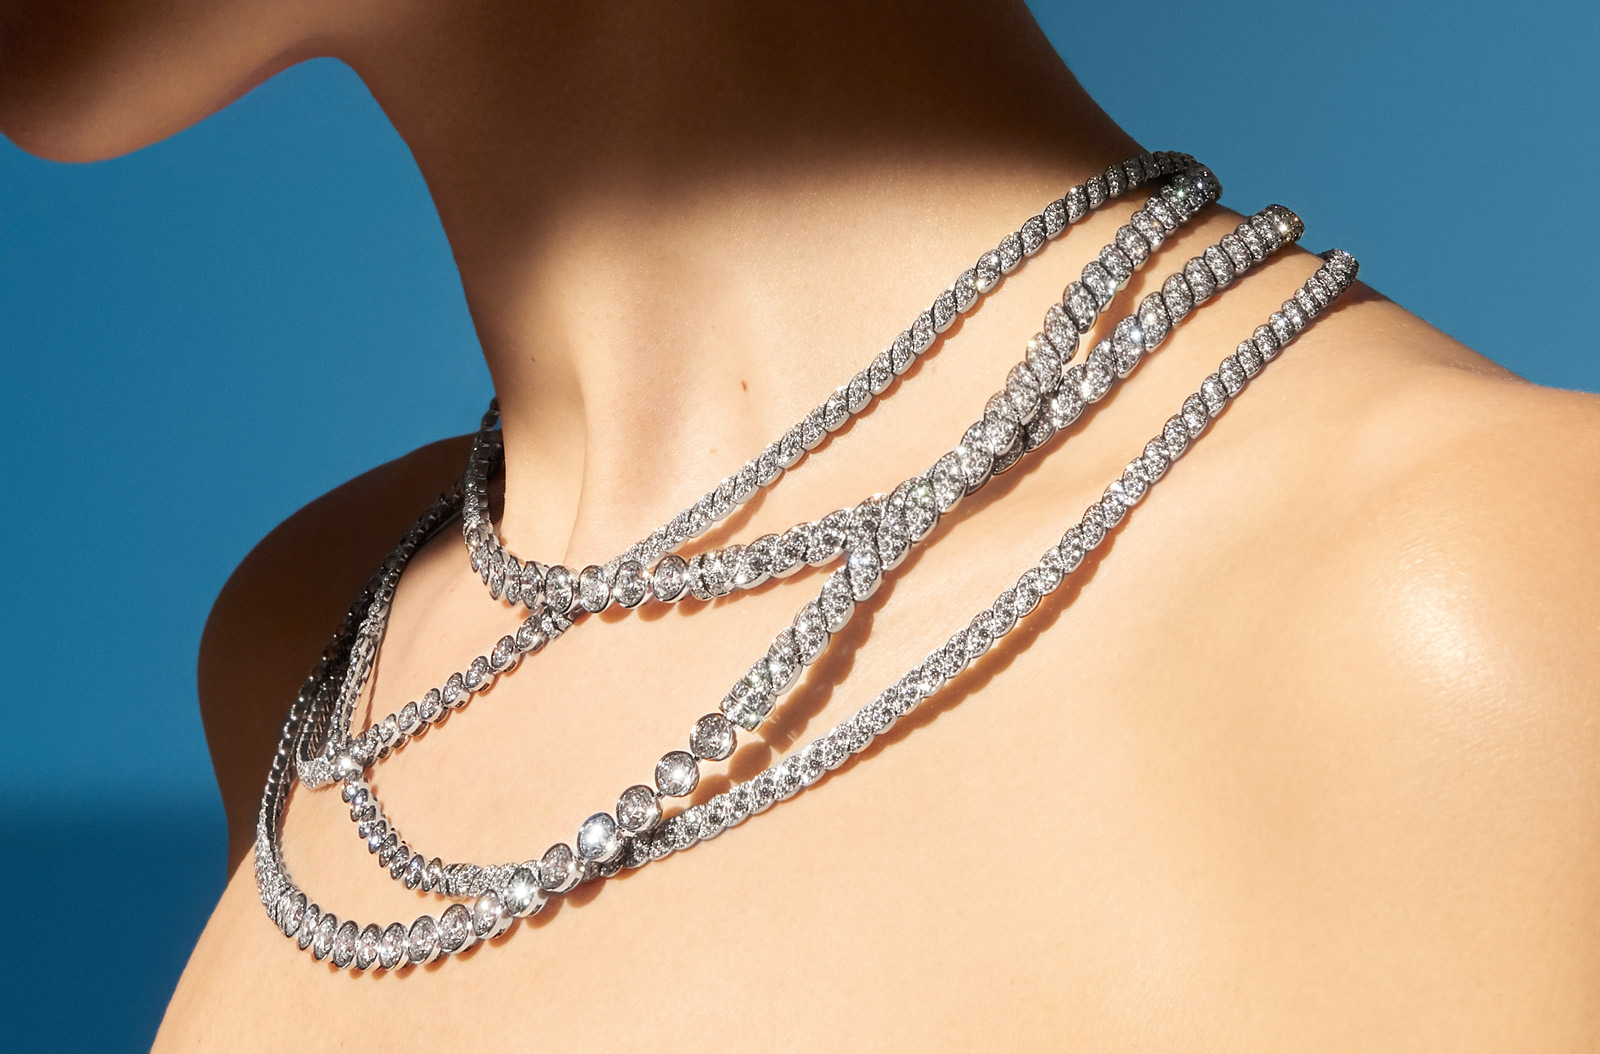 "Sparkling Lines" necklace from "Flying Cloud" collection in 18K white gold set with 49 round-cut diamonds and 2823 brilliant-cut diamonds